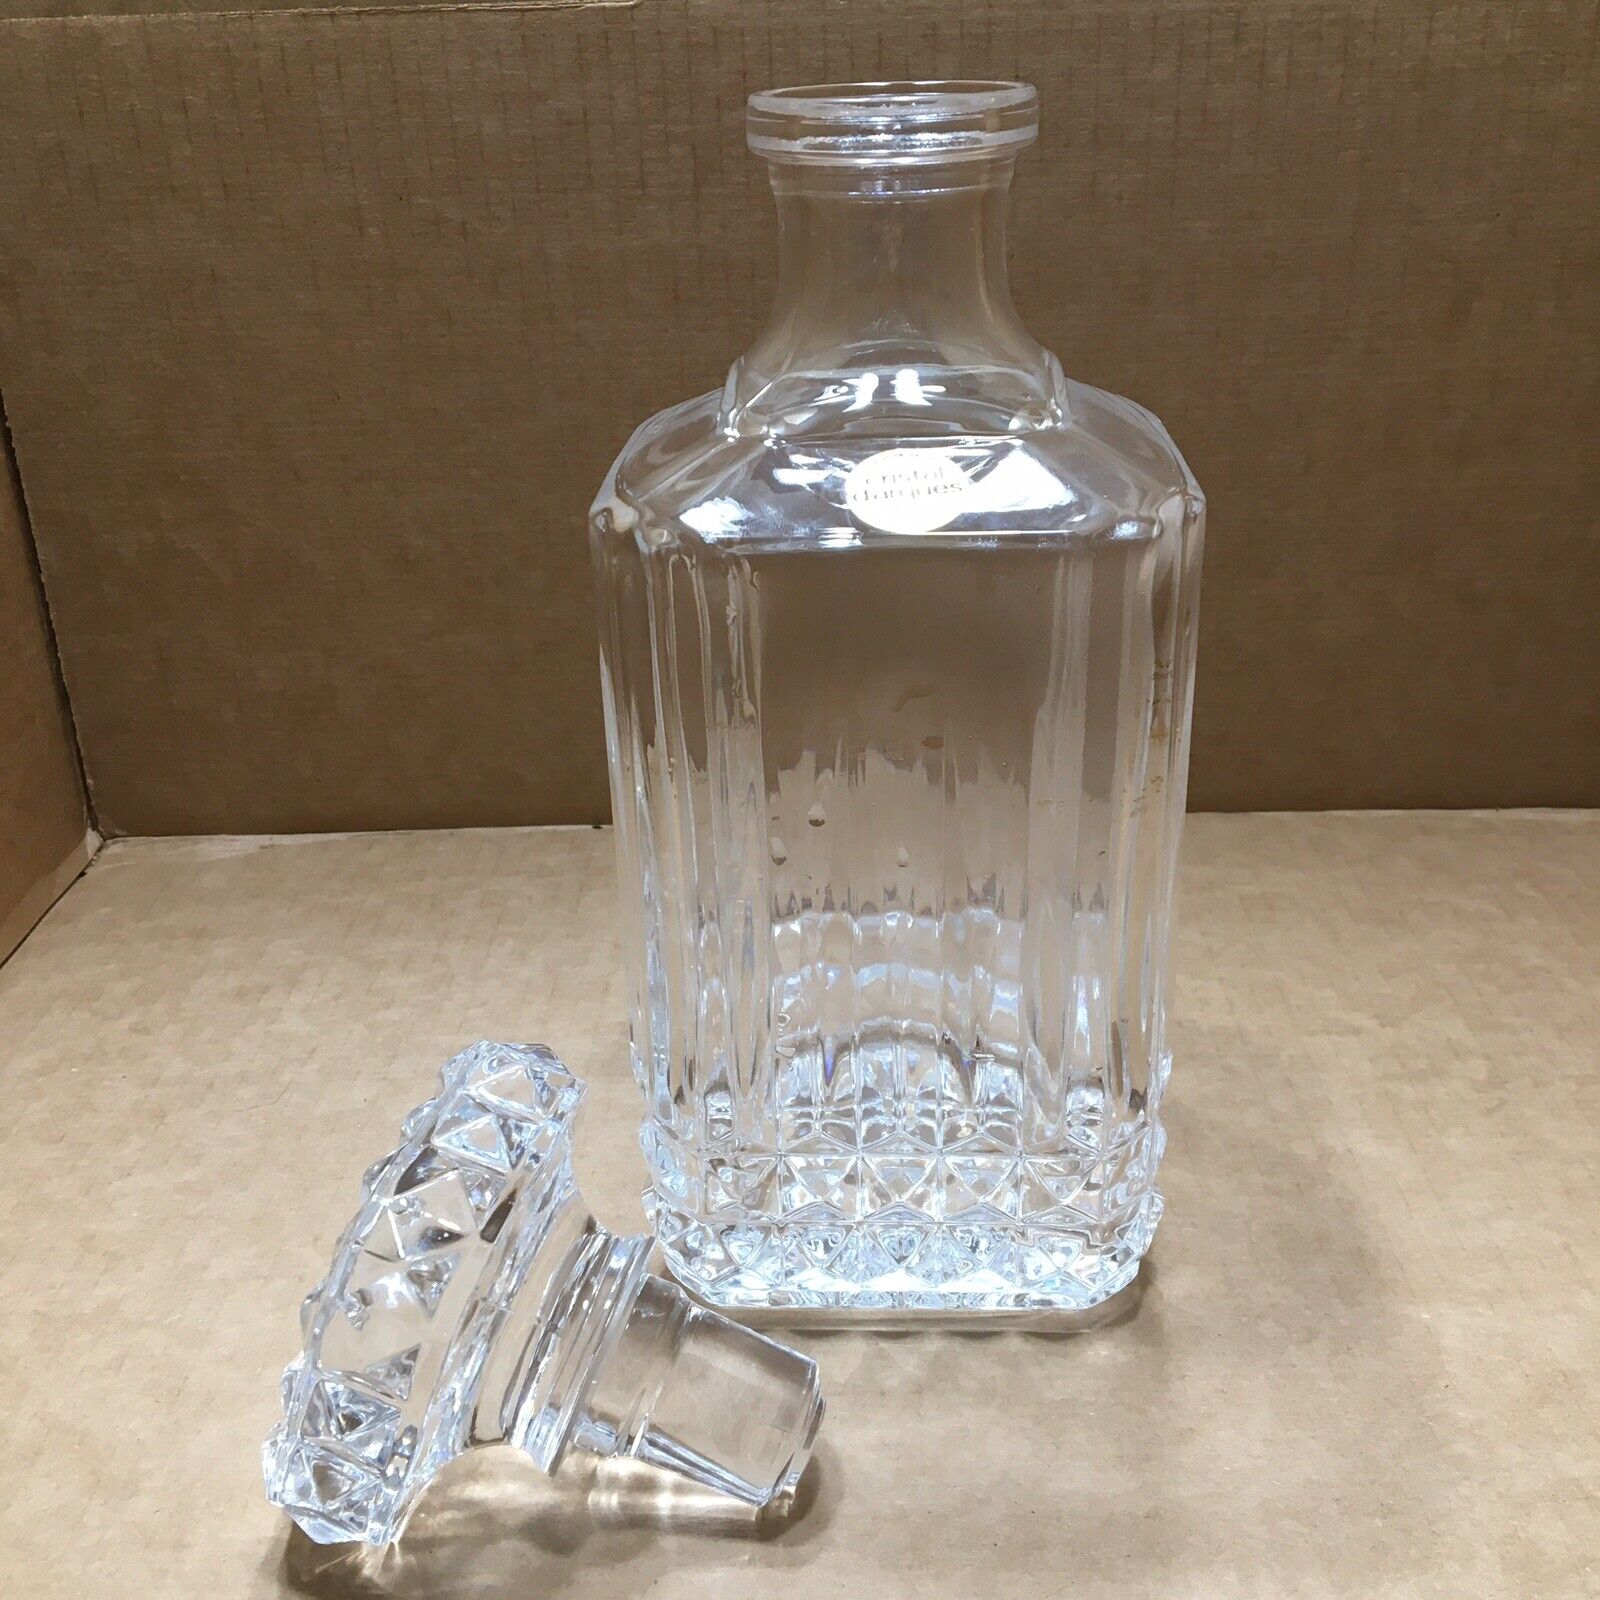 Vintage Genuine French Lead Crystal Decanter